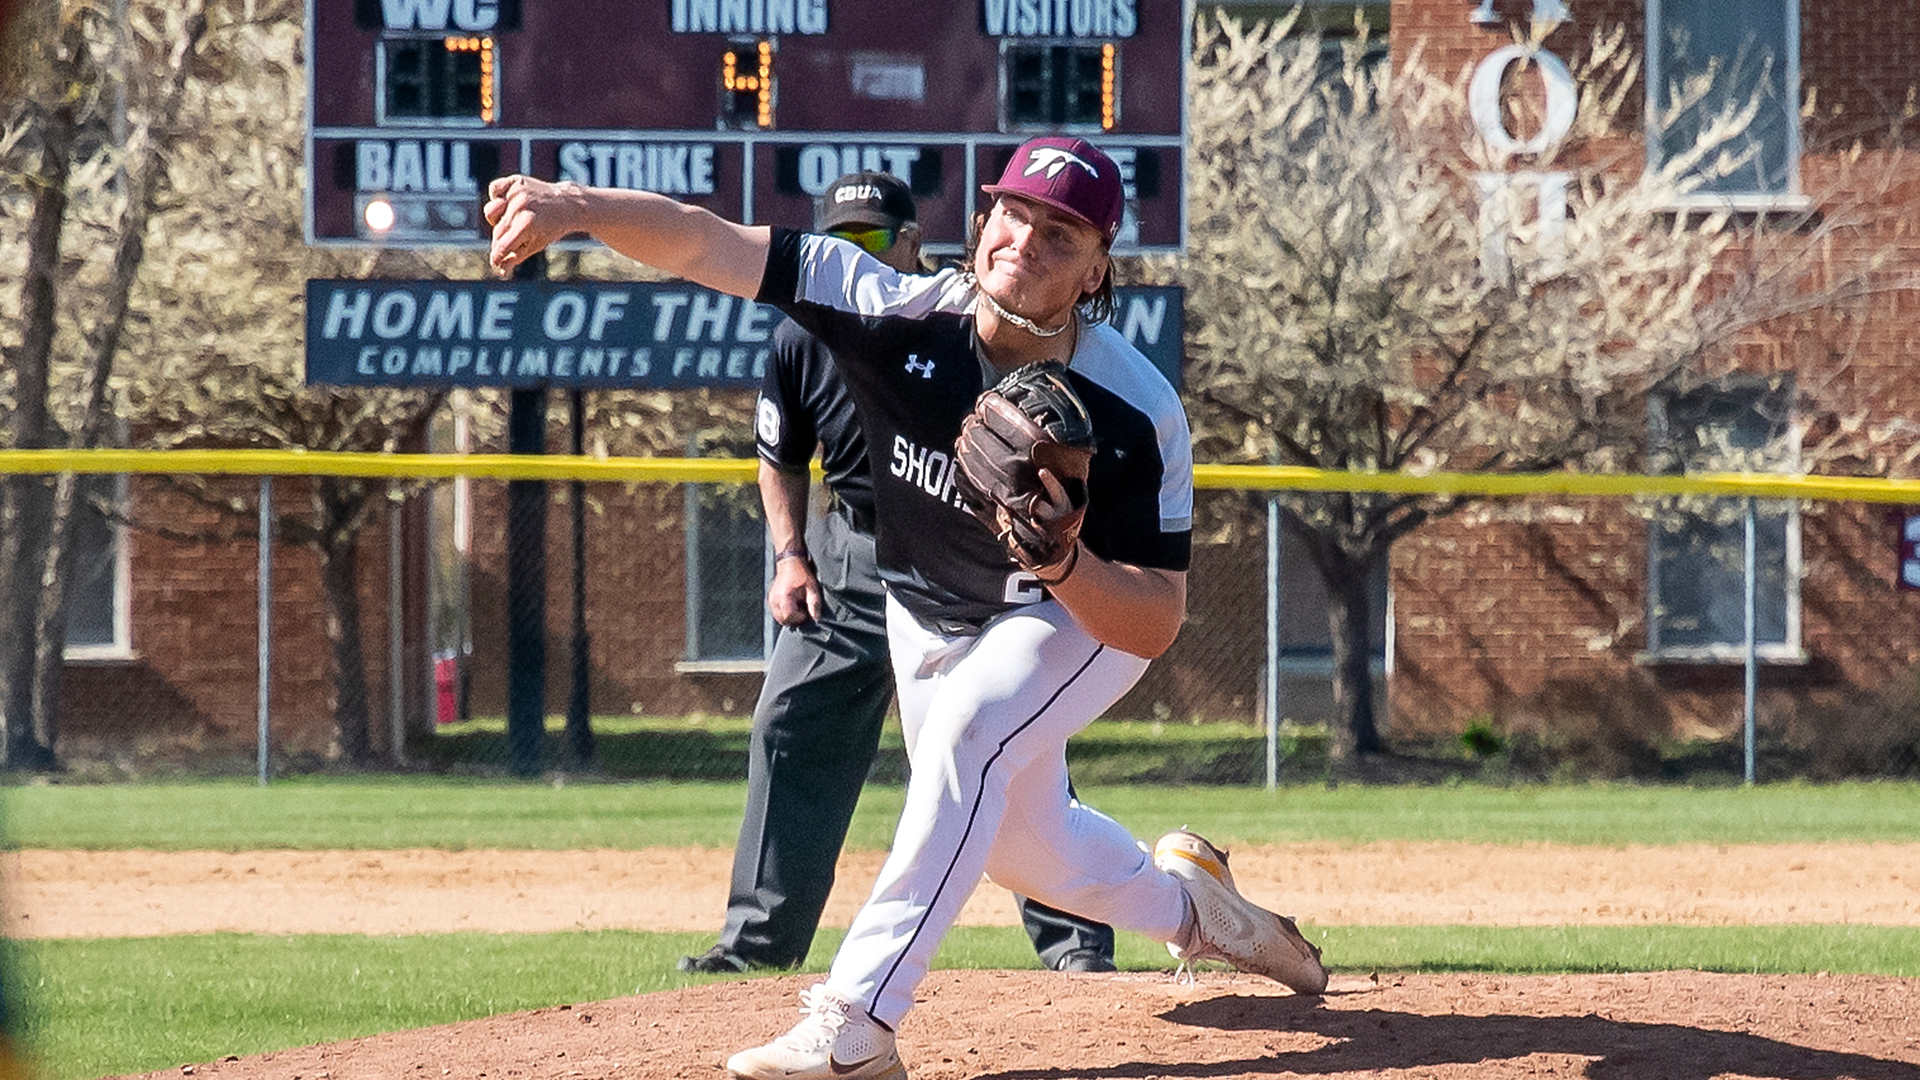 Washington College's Morrissey Tabbed D3baseball.com Region 5 Rookie of the Year; 13 Honored